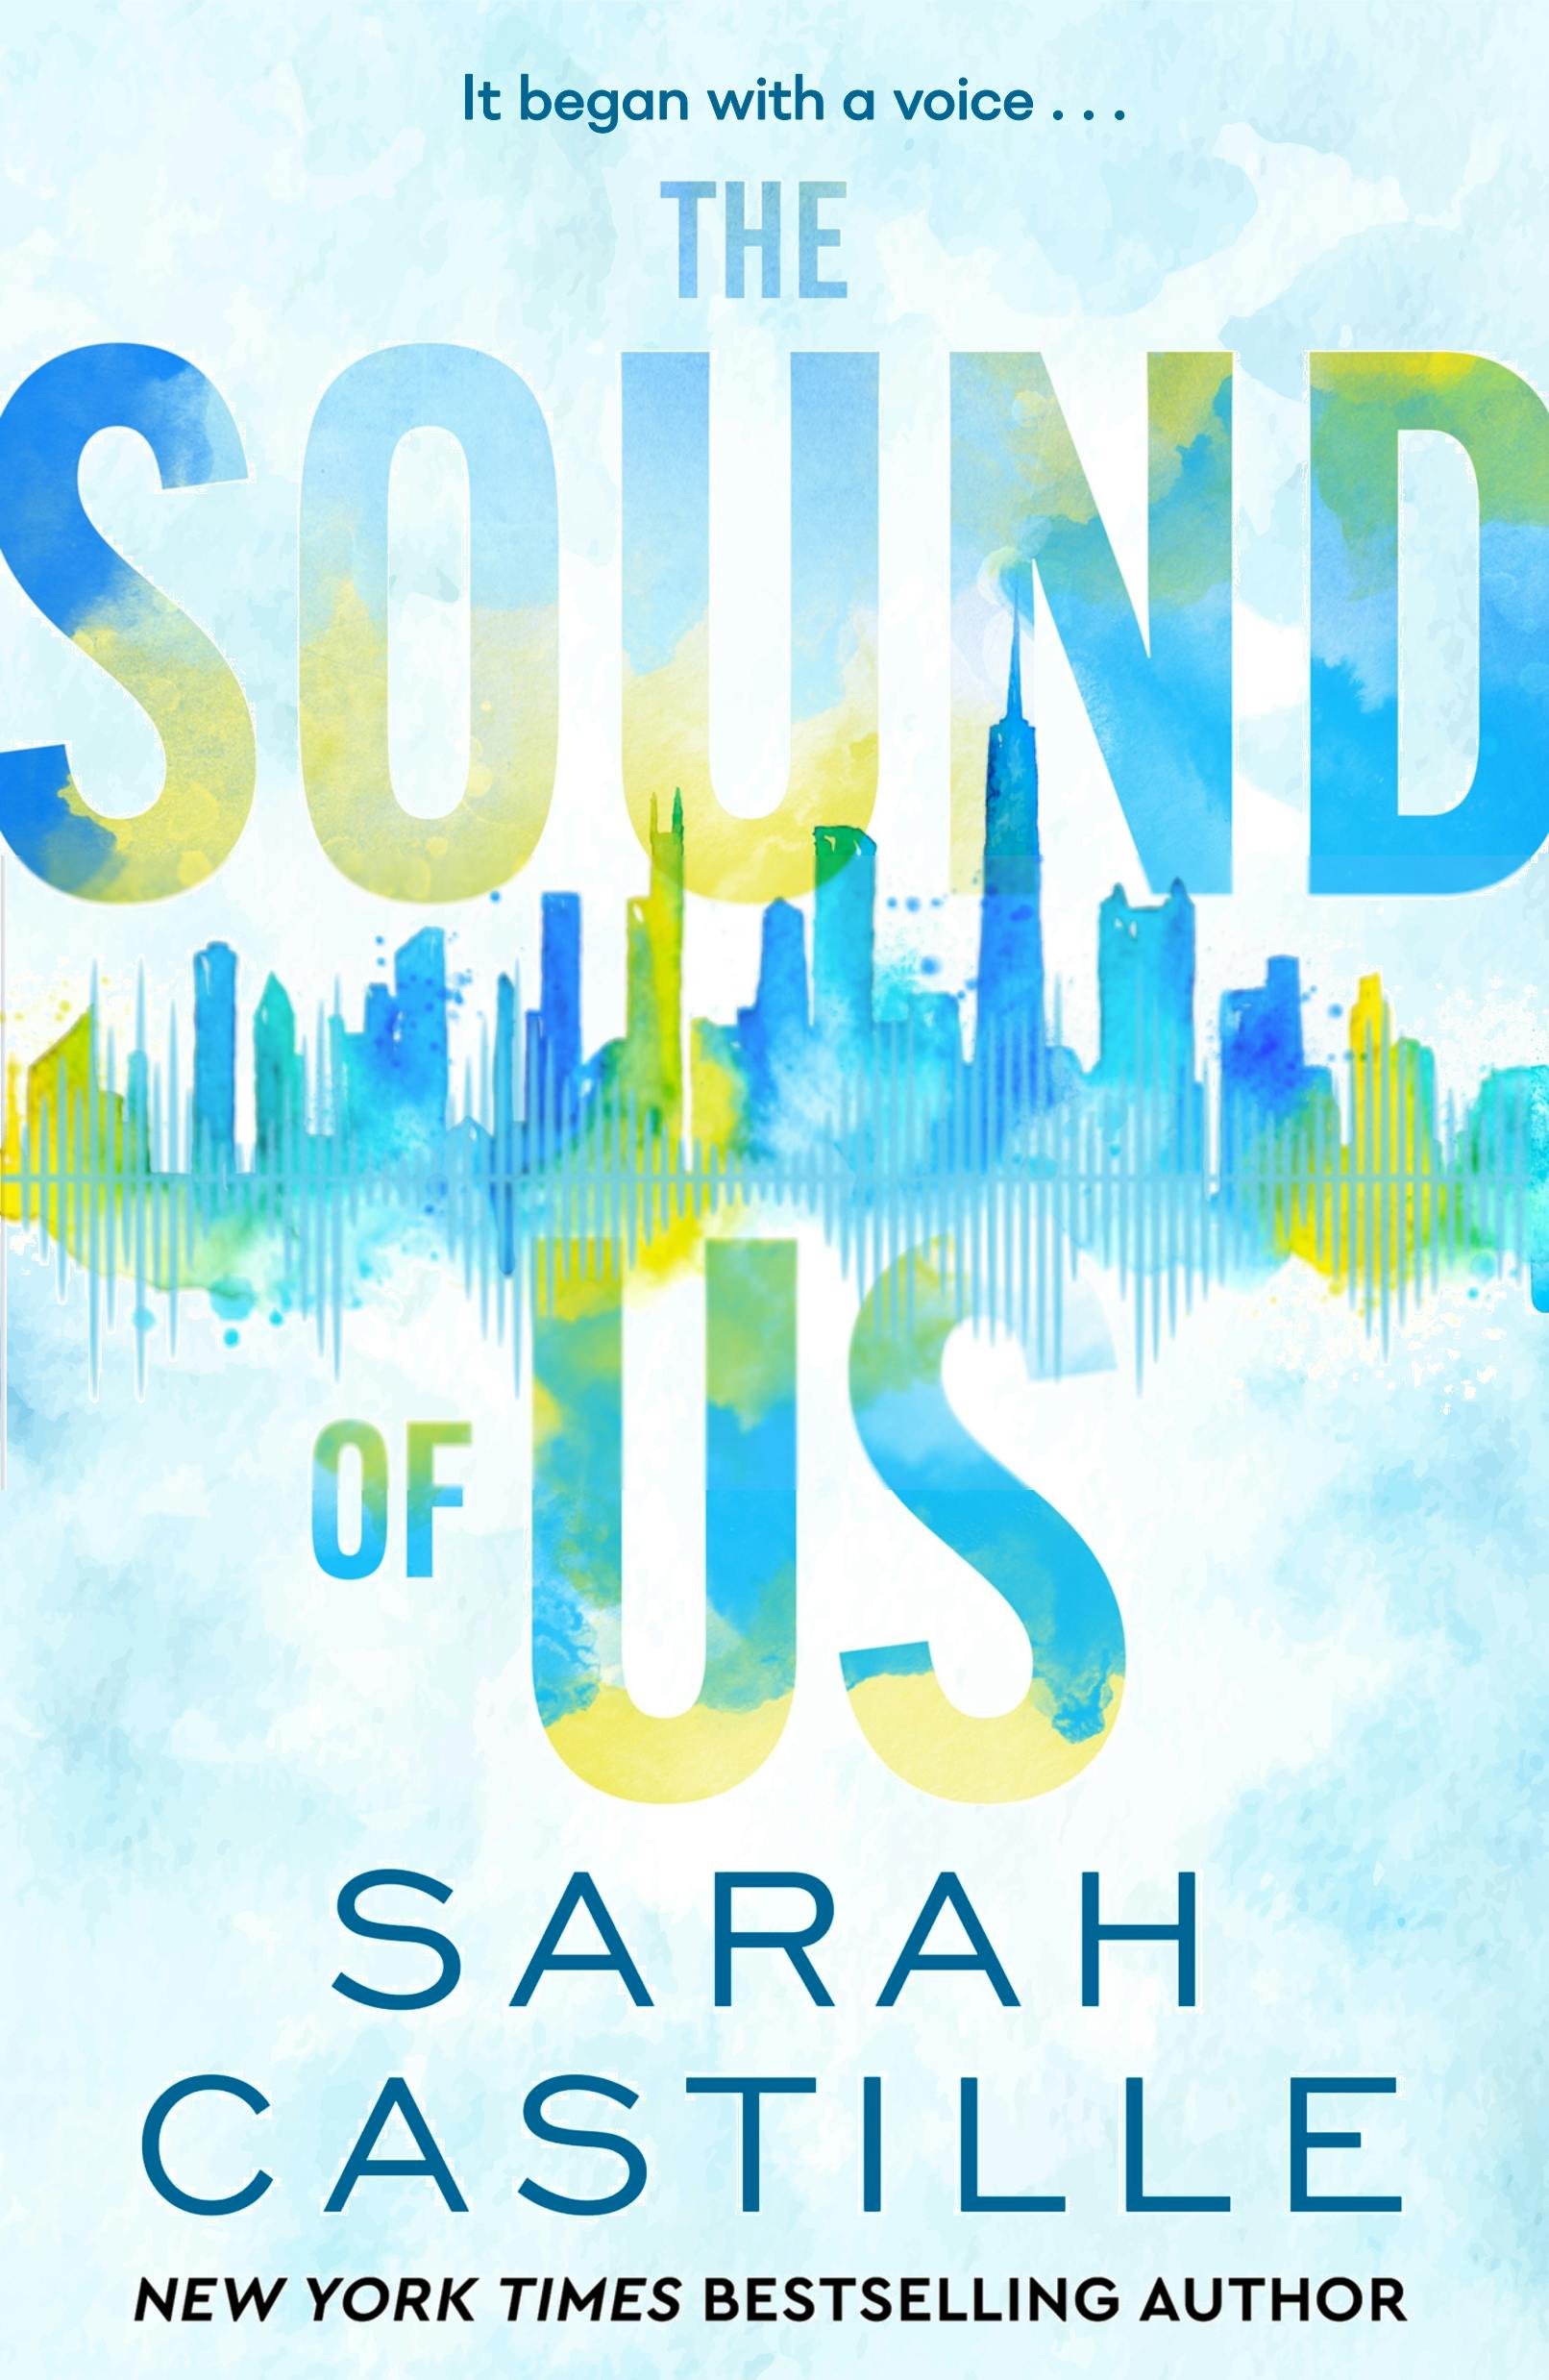 Cover for the book titled as: The Sound of Us